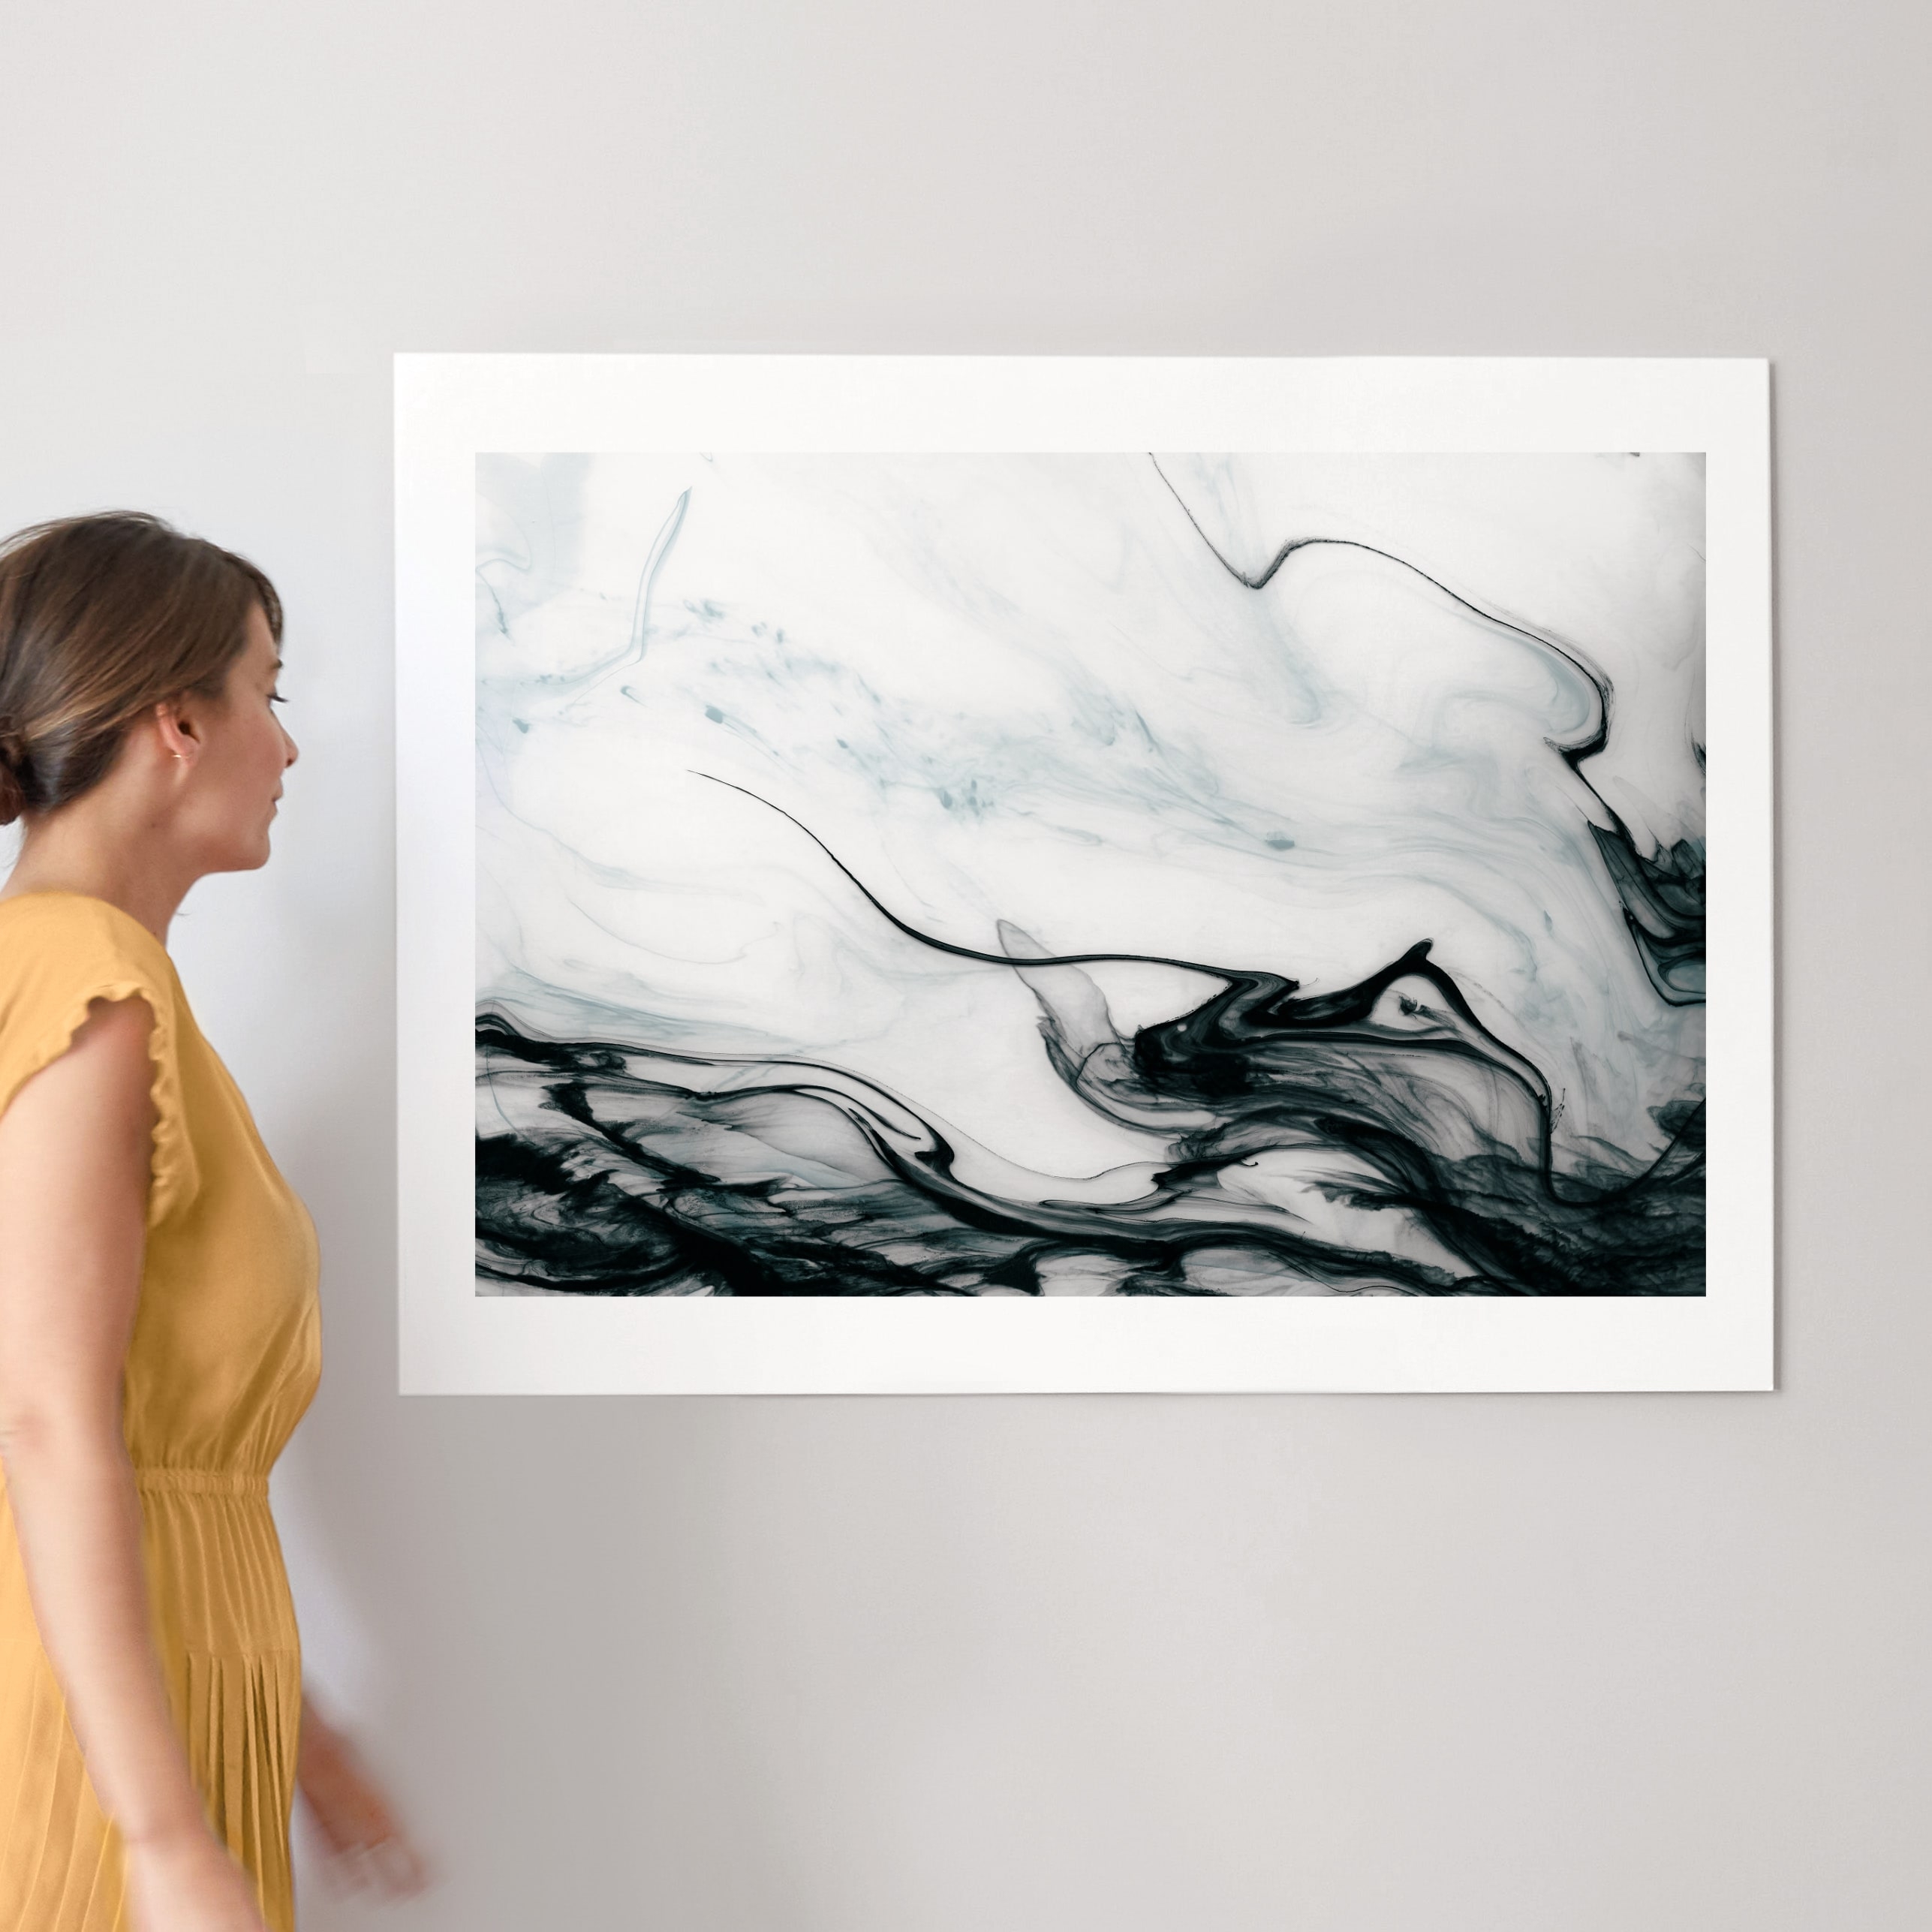 Ethereal Flow Art Print_ 40" x 30"_Natural Raw Wood Frame_White Border_Slate Blue Color_Standard Plexi&Materials - Image 3